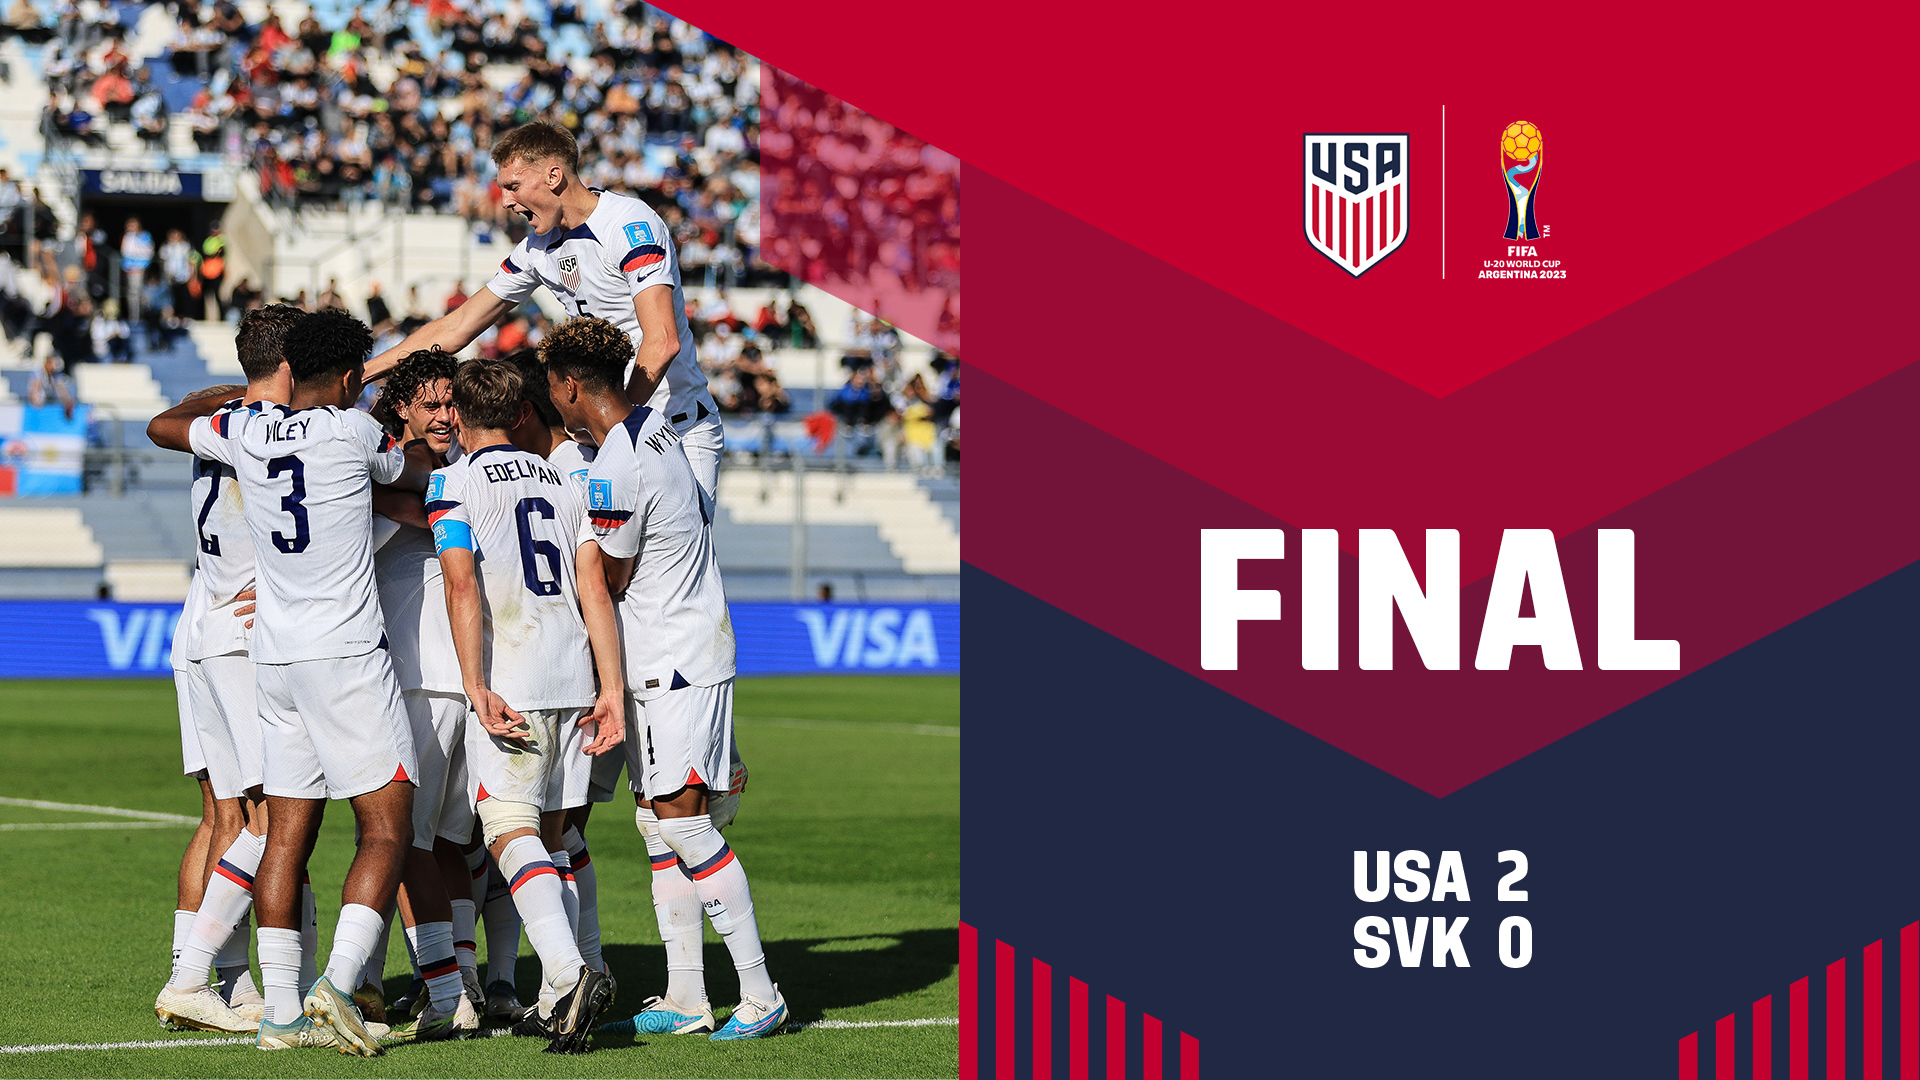 USA Tops Group B At 2023 FIFA U-20 World Cup With 2-0 Victory Against Slovakia